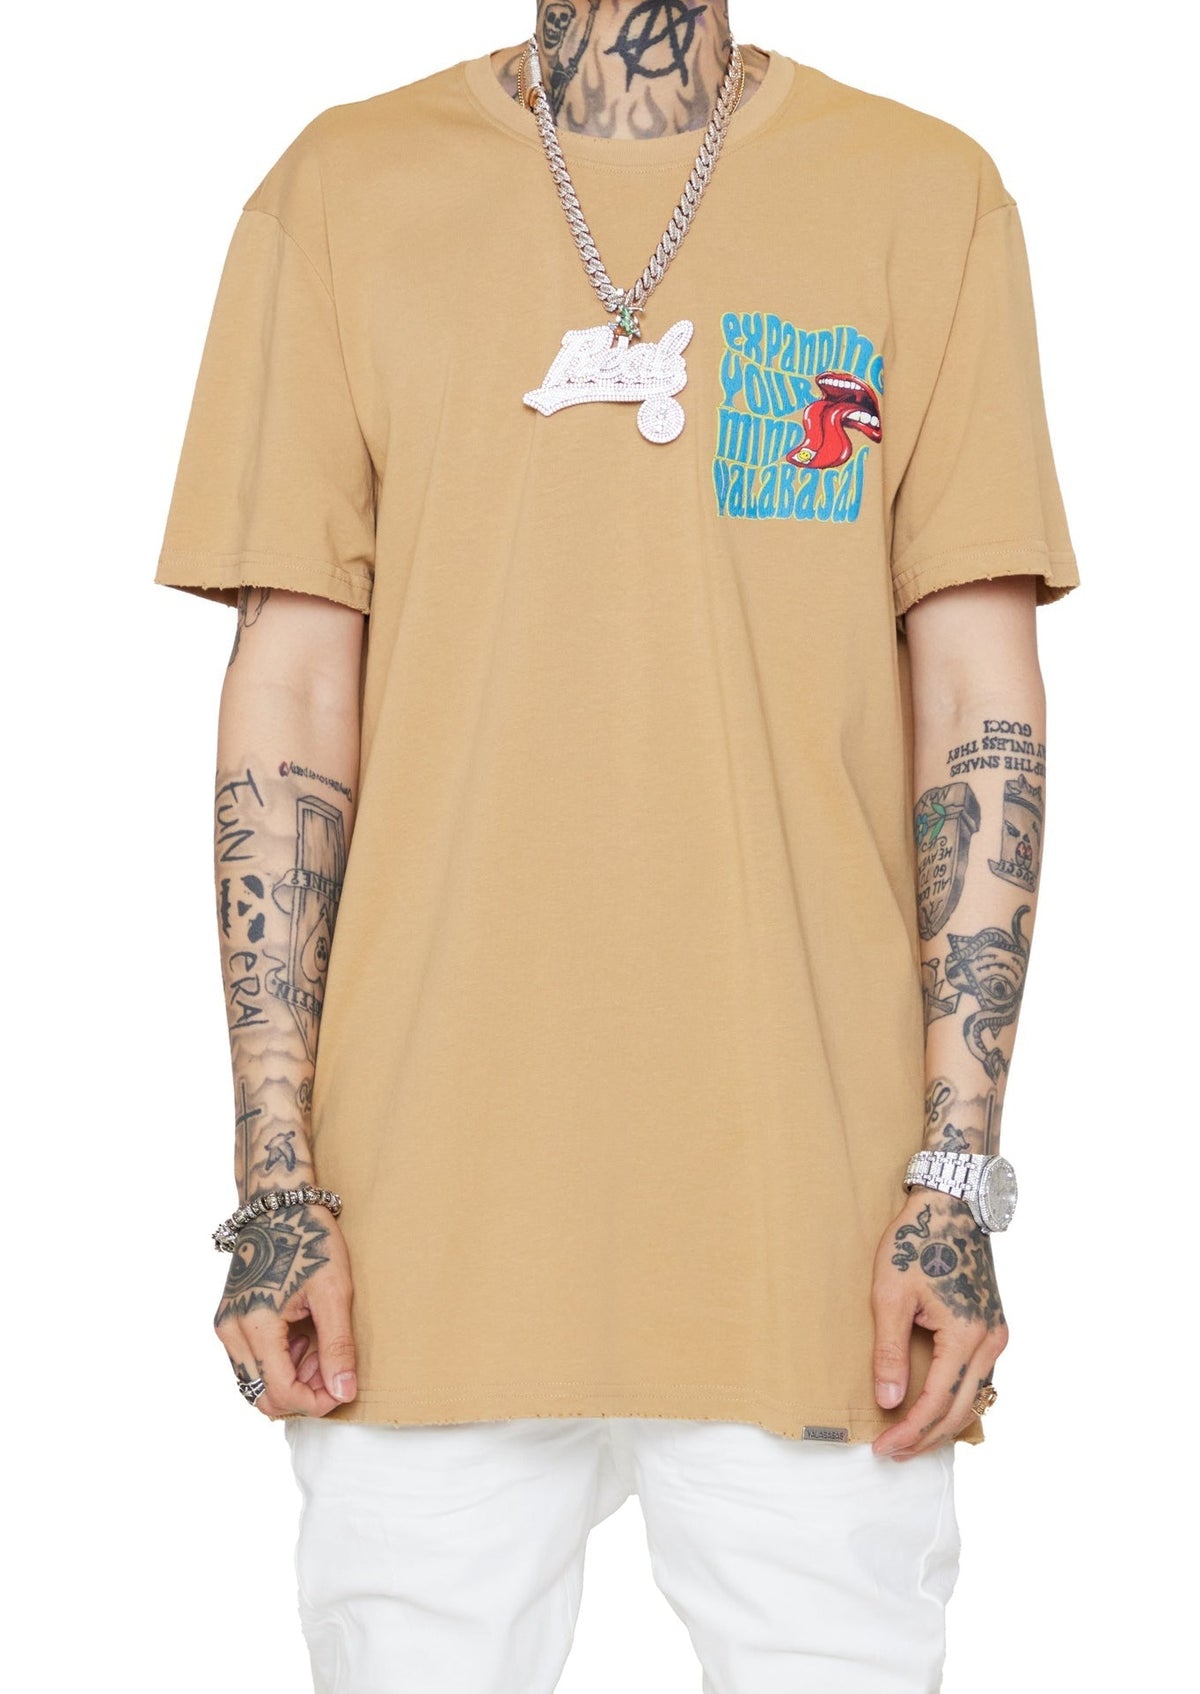 "MIND TABS" Tee features a BLOODY PANTHER graphic in a VINTAGE KHAKI color